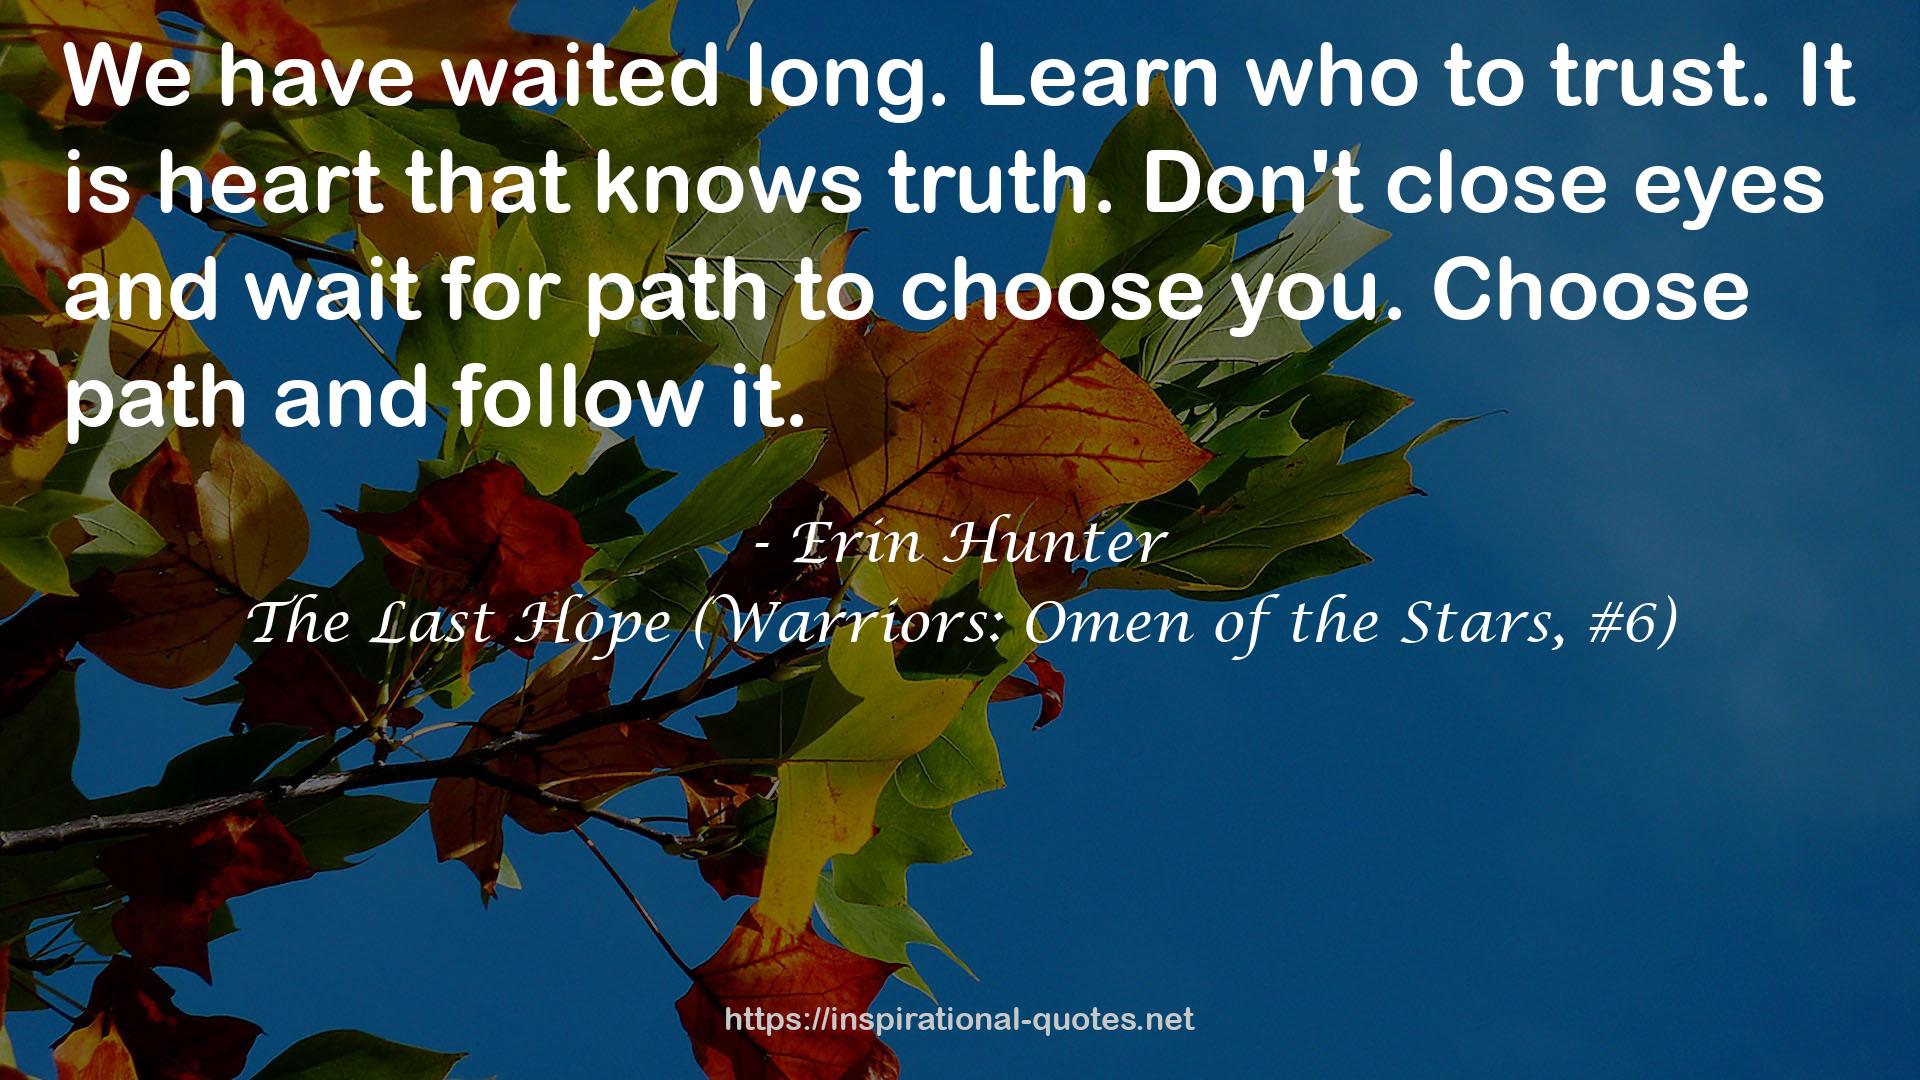 The Last Hope (Warriors: Omen of the Stars, #6) QUOTES